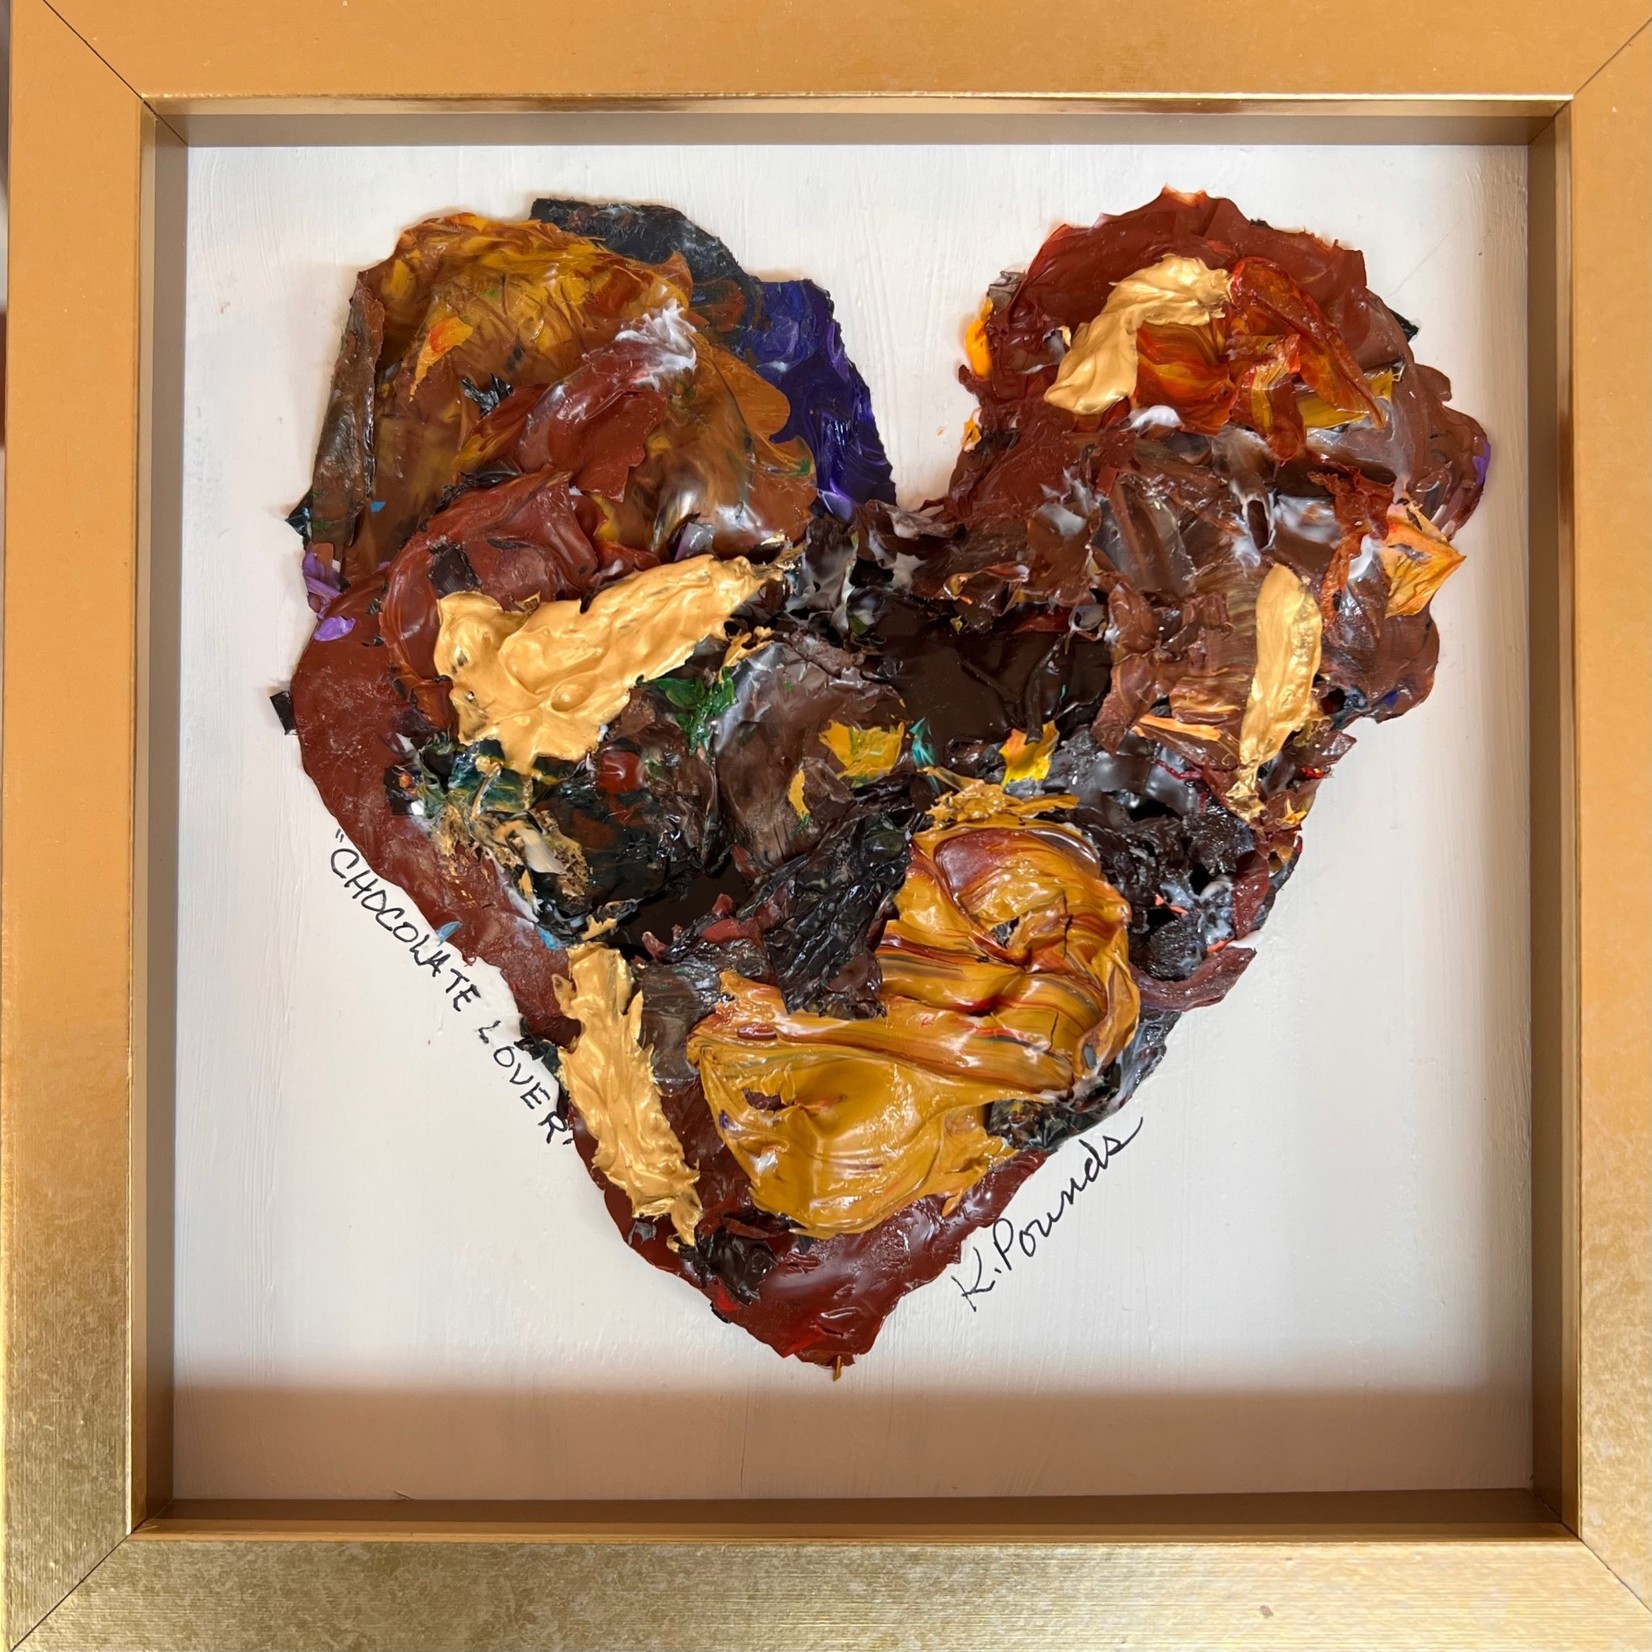 Kelly Pounds "Chocolate Lover," MM in shadow box frame, 9x9, KELP